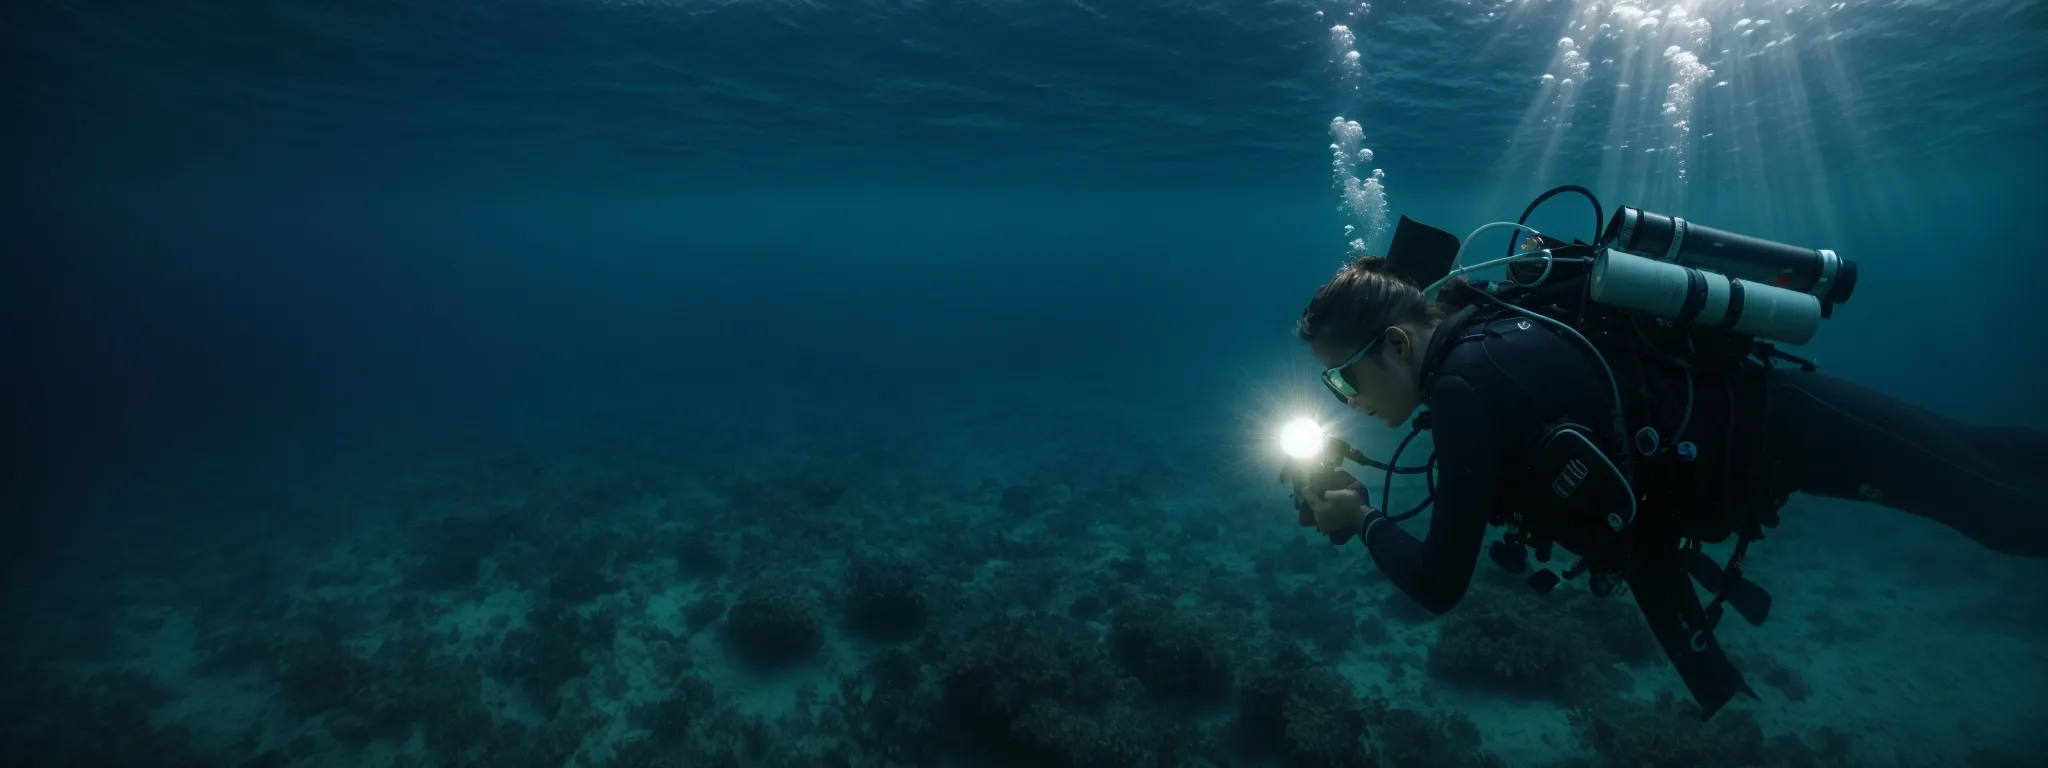 a diver with a flashlight explores the vast underwater landscape, symbolizing in-depth keyword analytics in the ocean of seo.